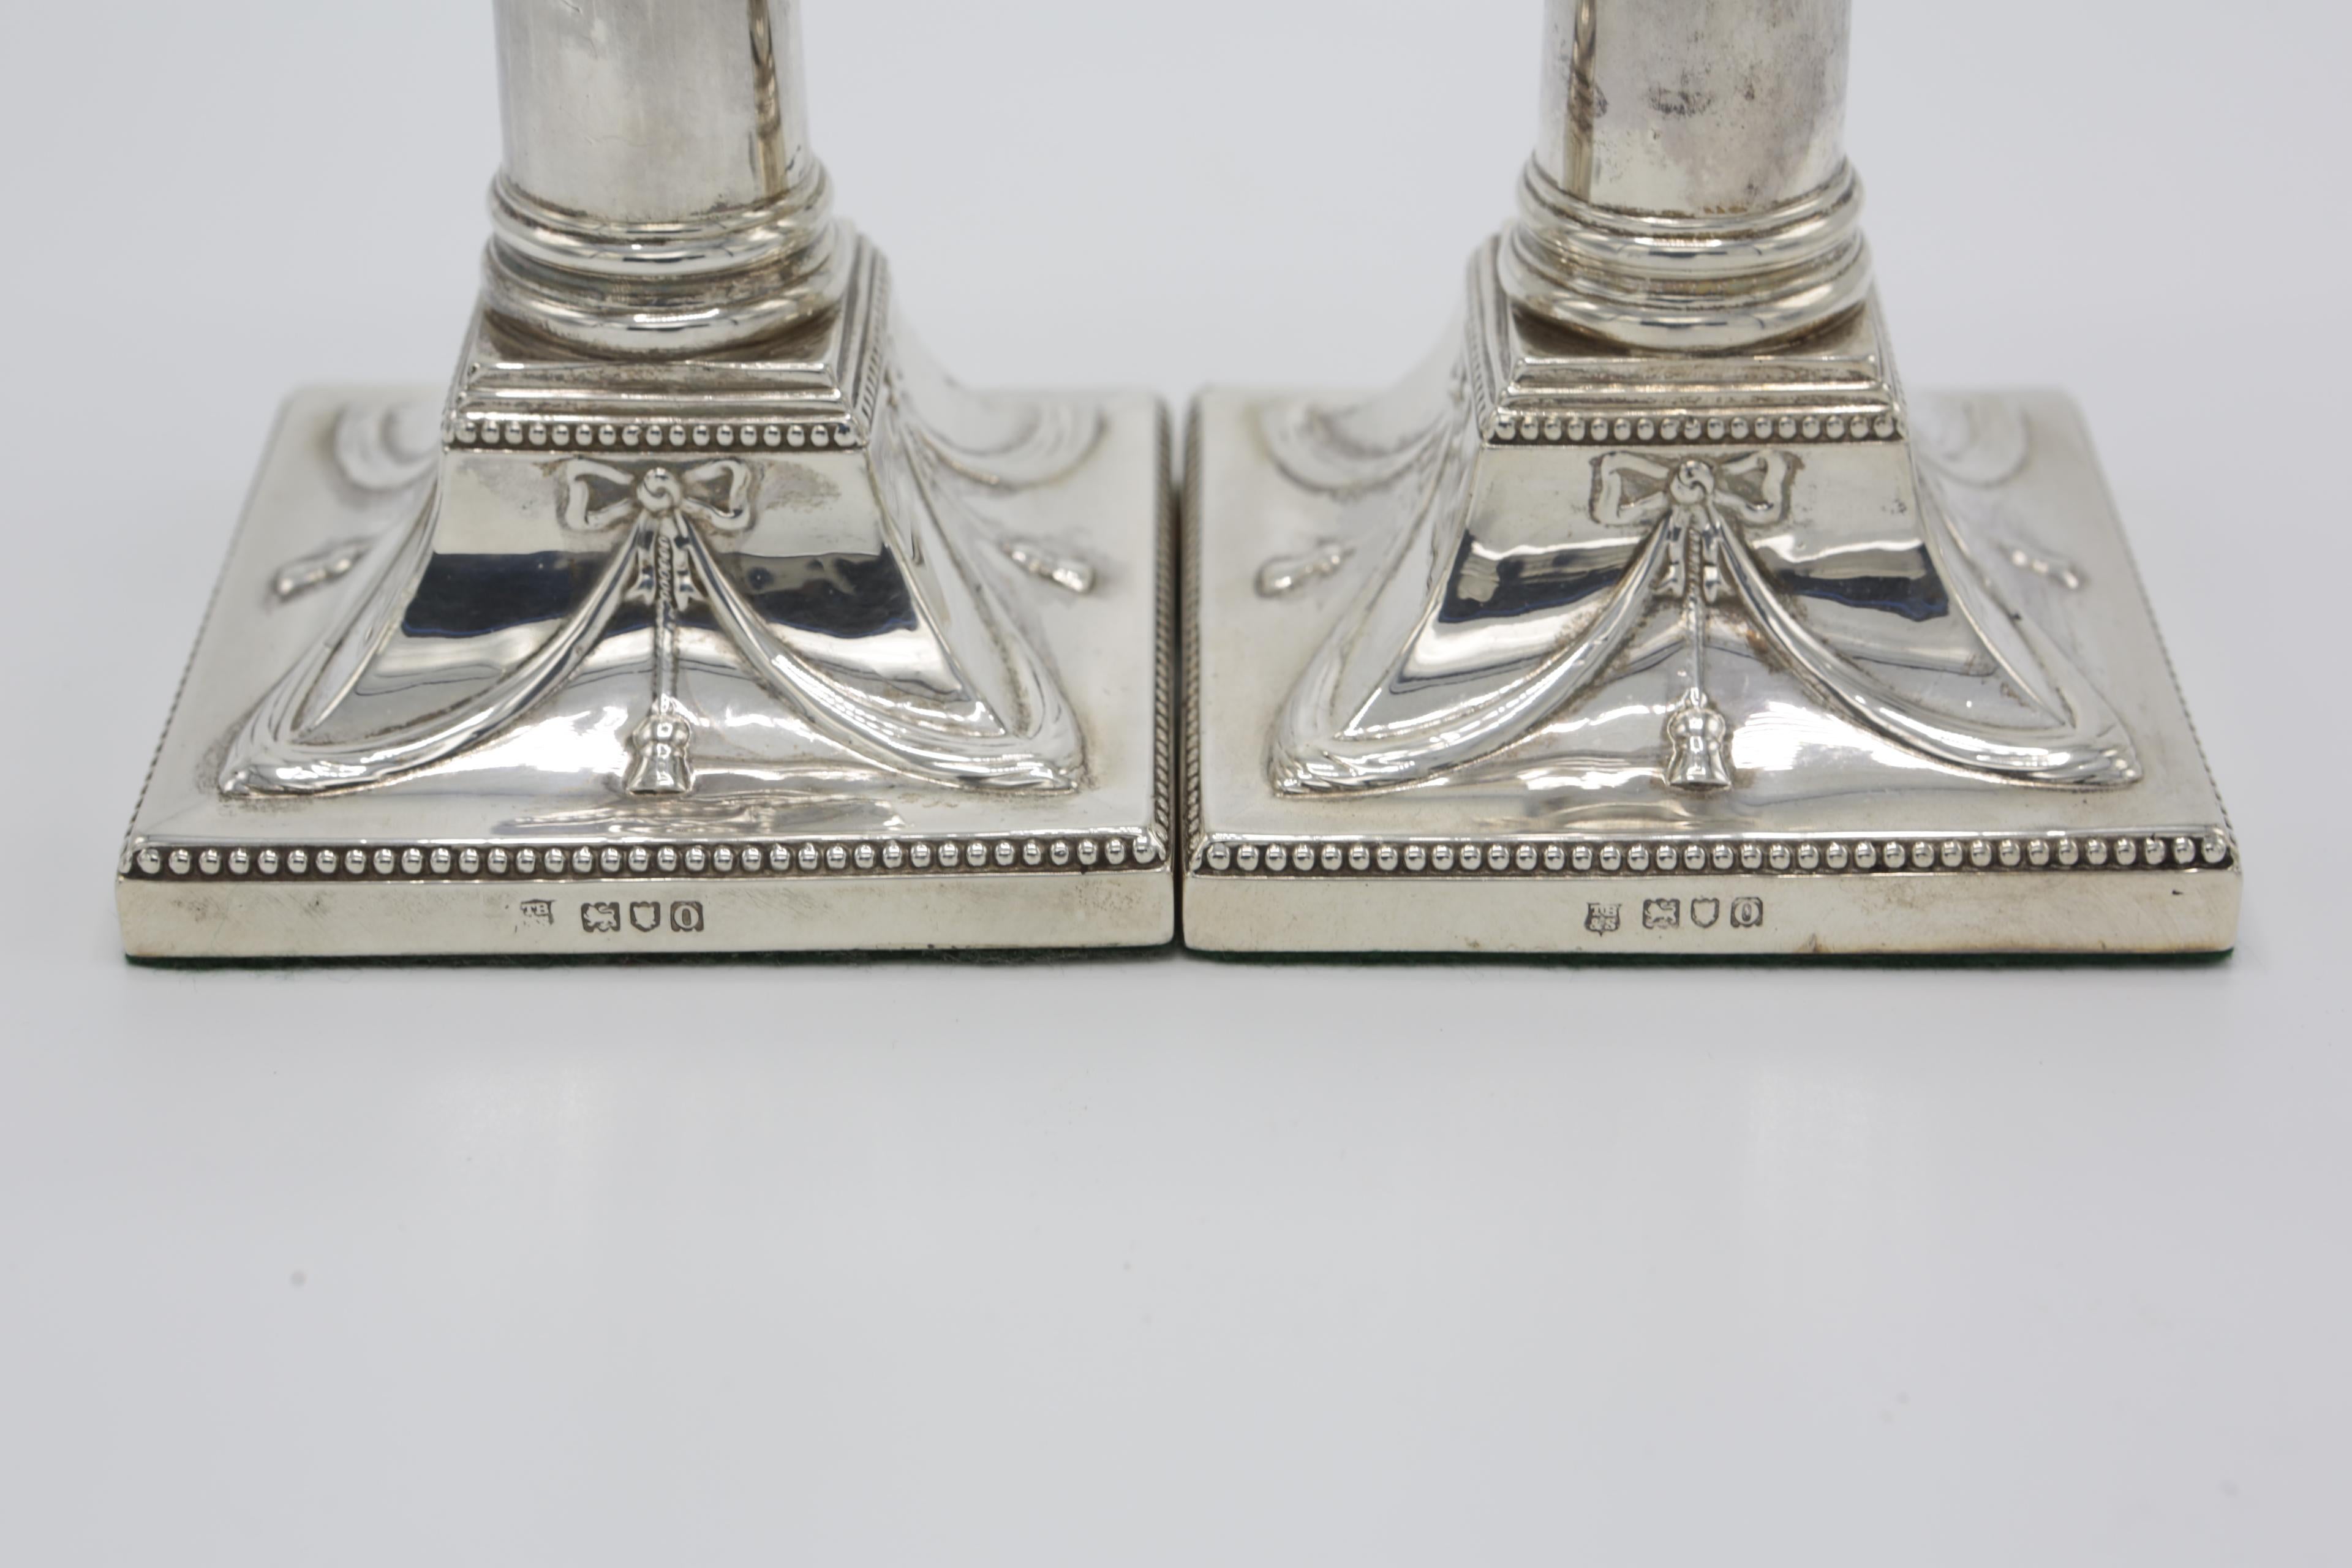 British Pair of Candlesticks, London 1909, 925 Sterling Silver, Hallmarked For Sale